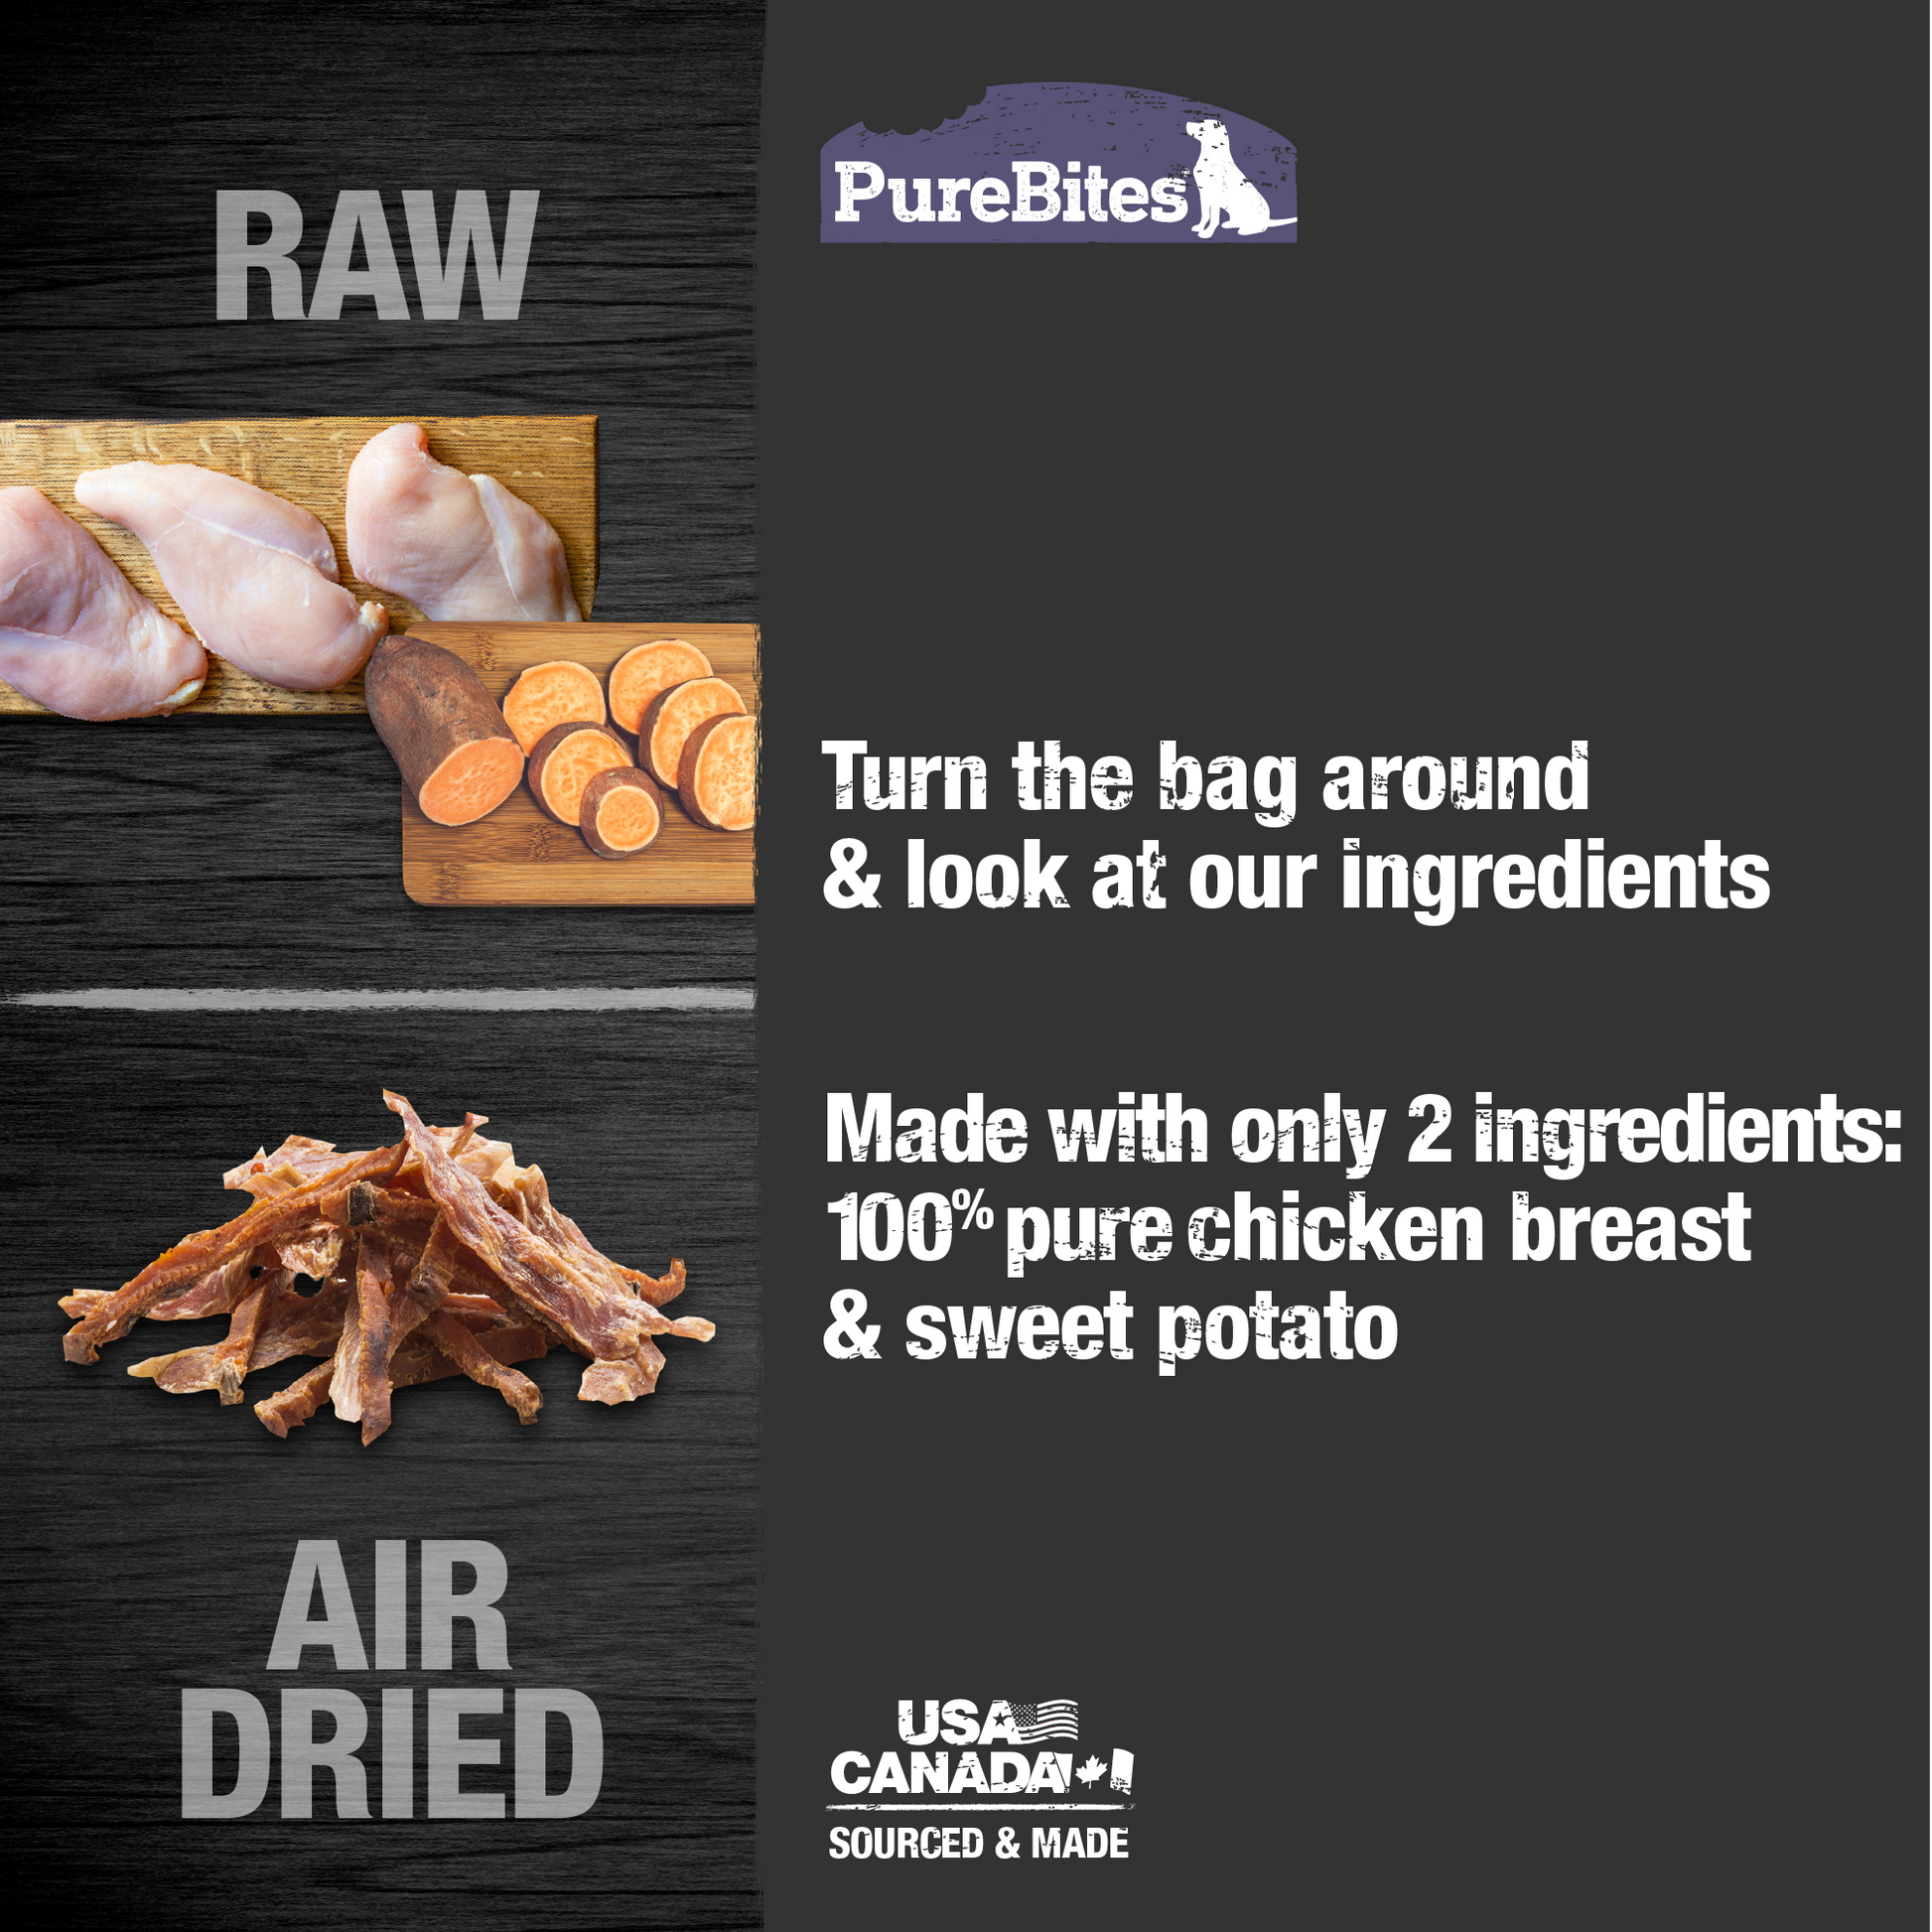 Made with only 2 Ingredients you can read, pronounce, and trust: USA & Canadian sourced chicken breast, sweet potato.